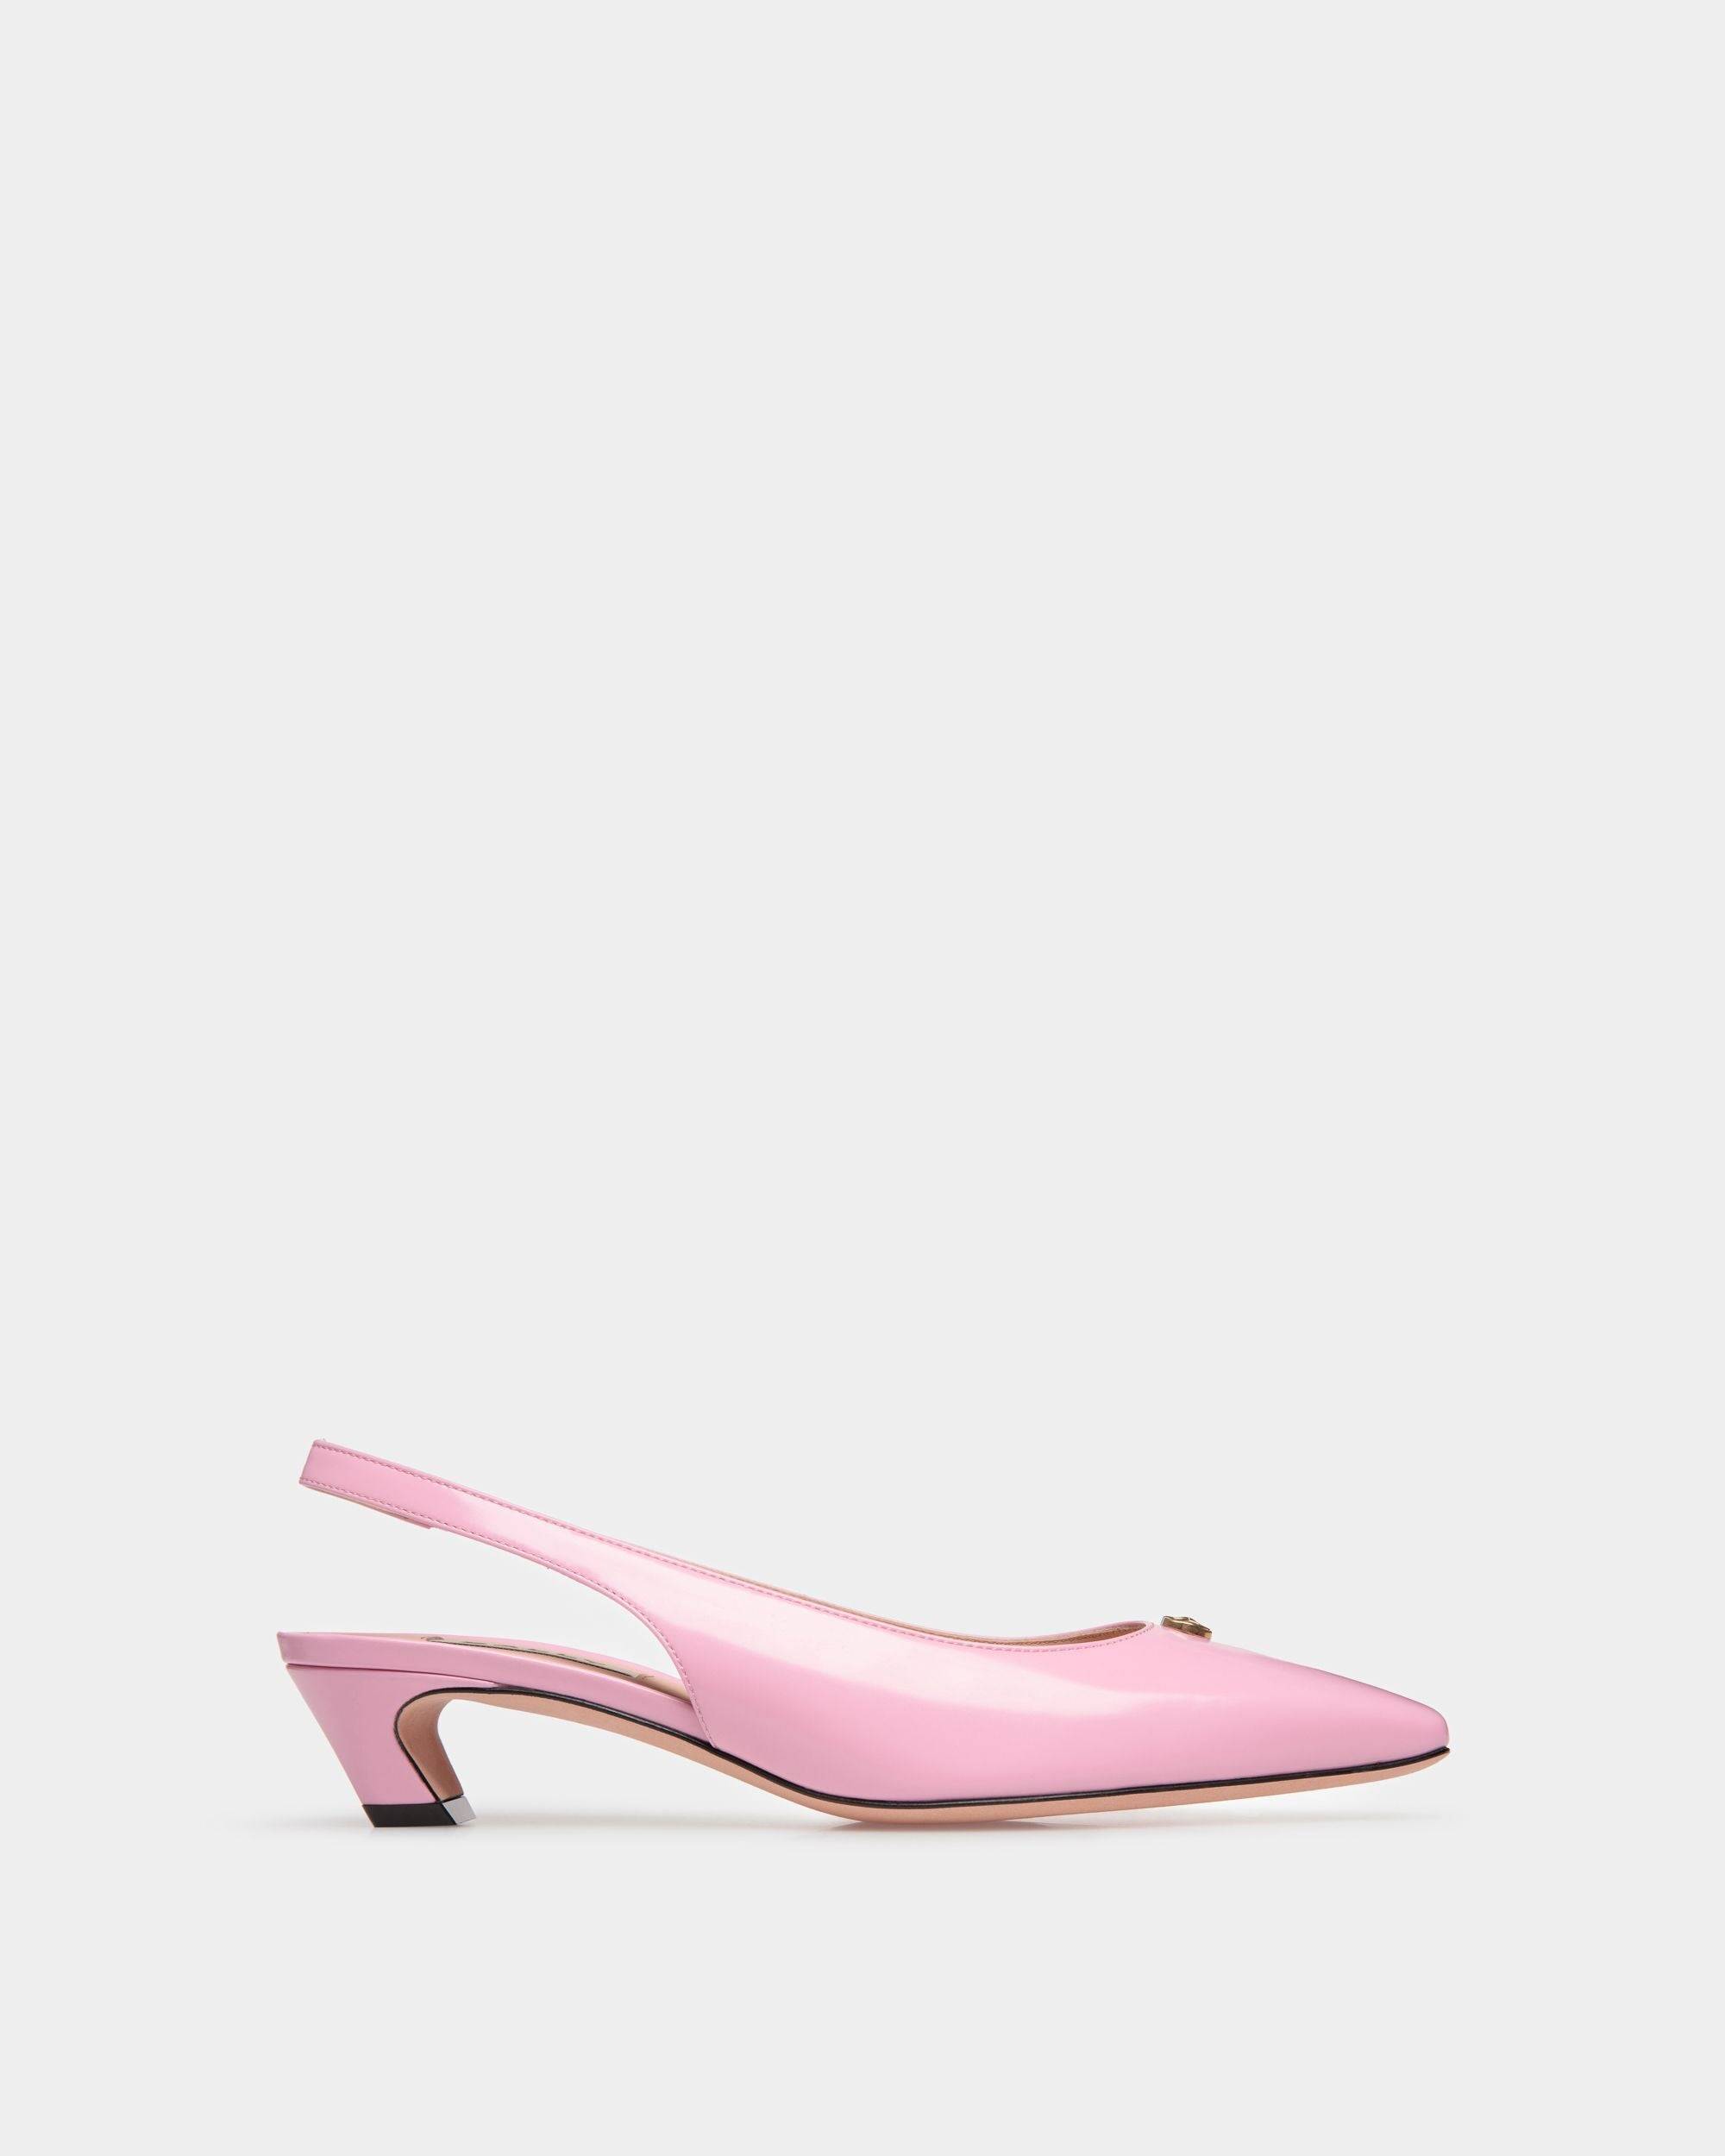 Women's Sylt Slingback Pump In Pink Leather | Bally | Still Life Side